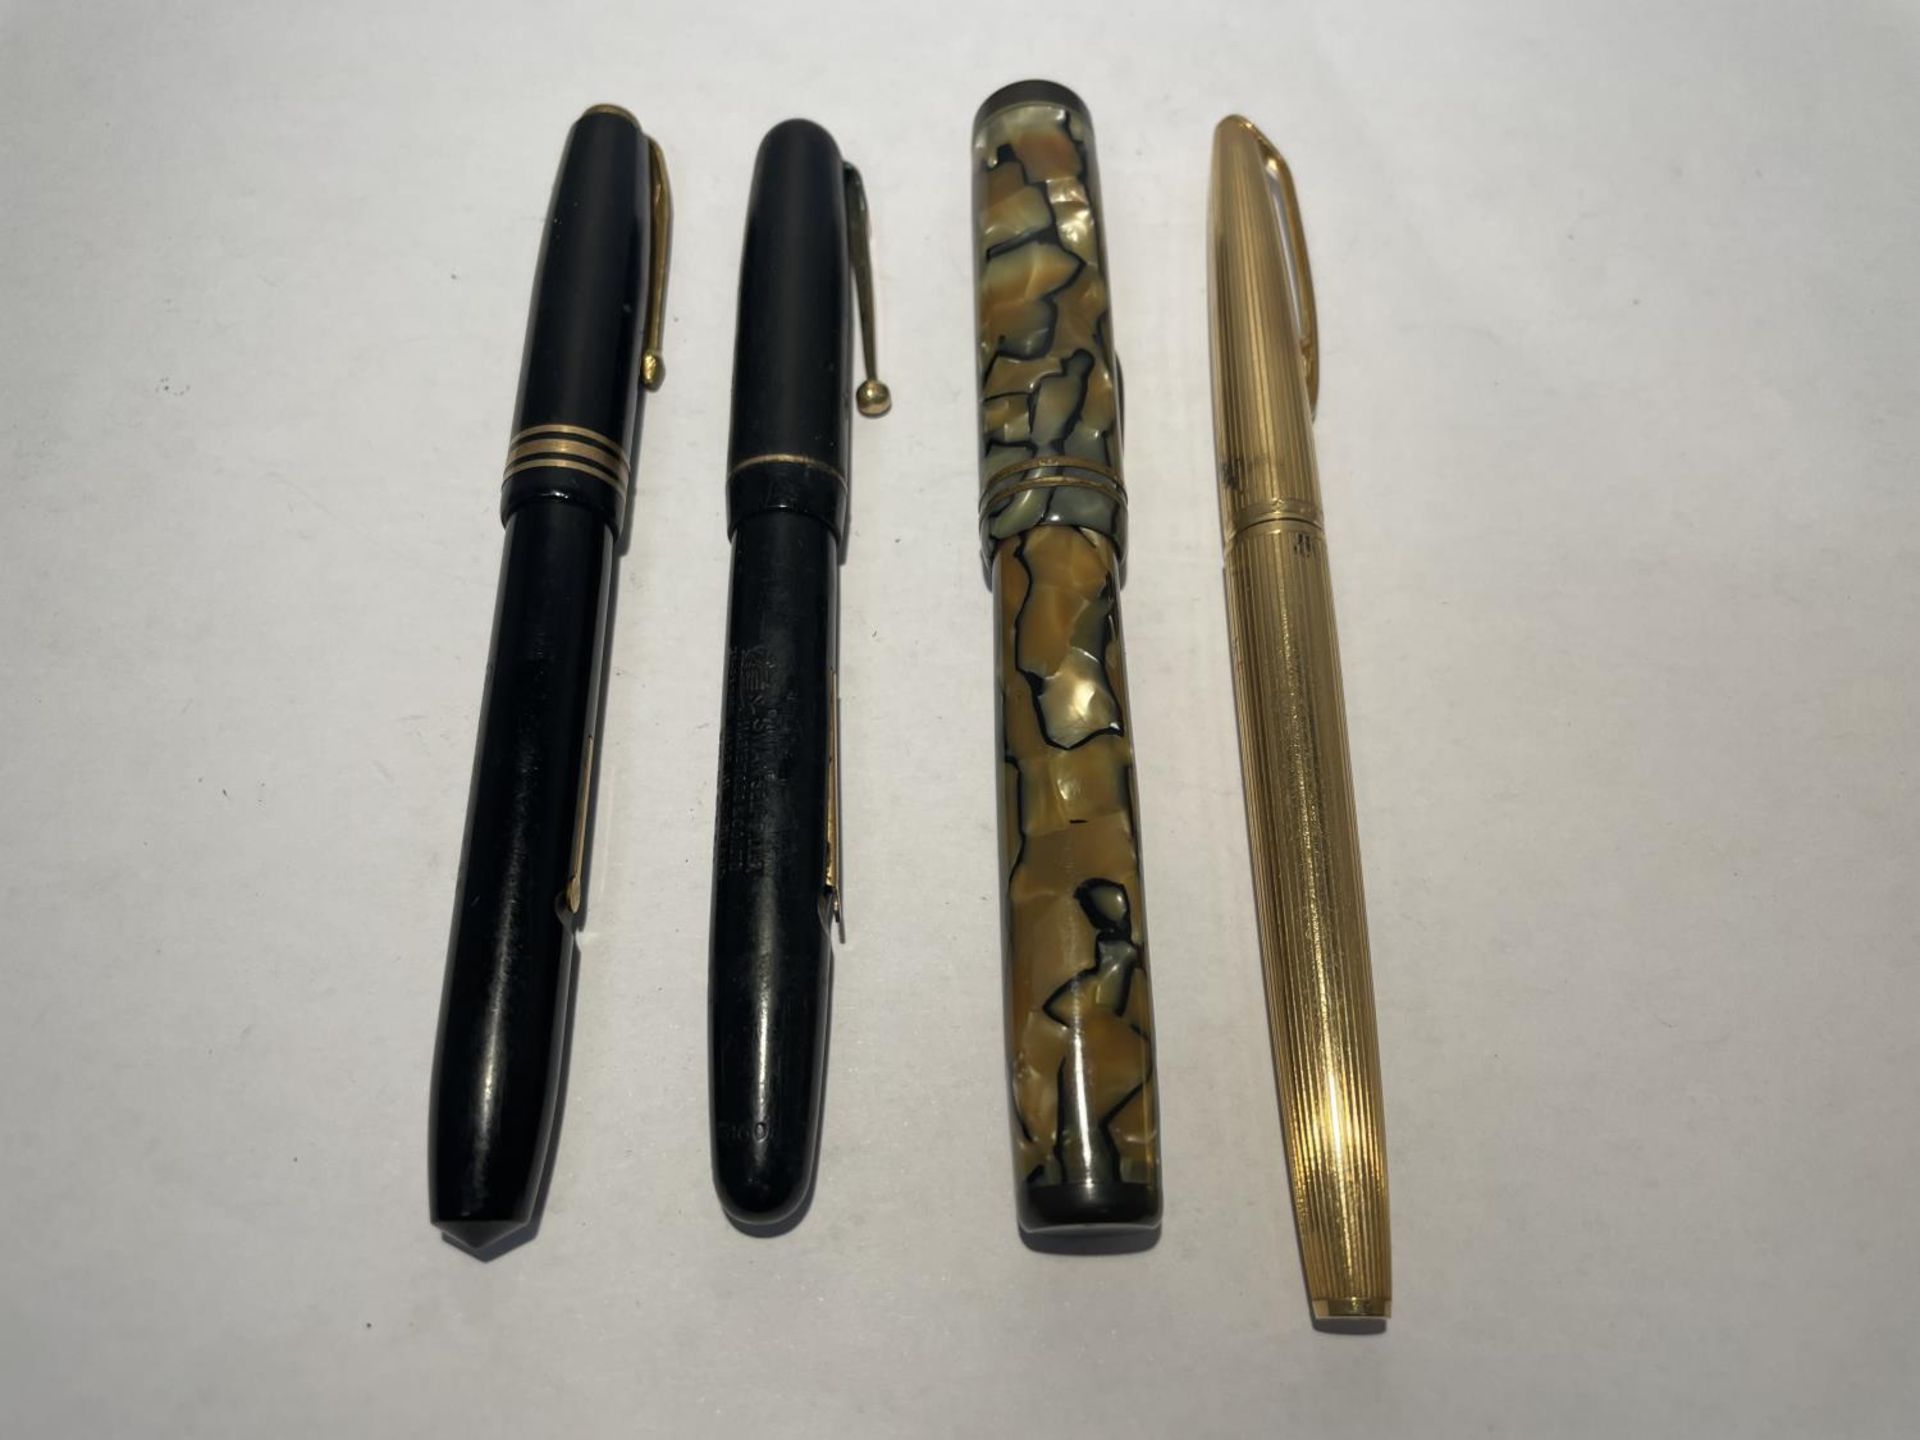 FOUR VINTAGE FOUNTAIN PENS - THREE WITH 14 CARAT AND ONE 18 CARAT GOLD NIBS